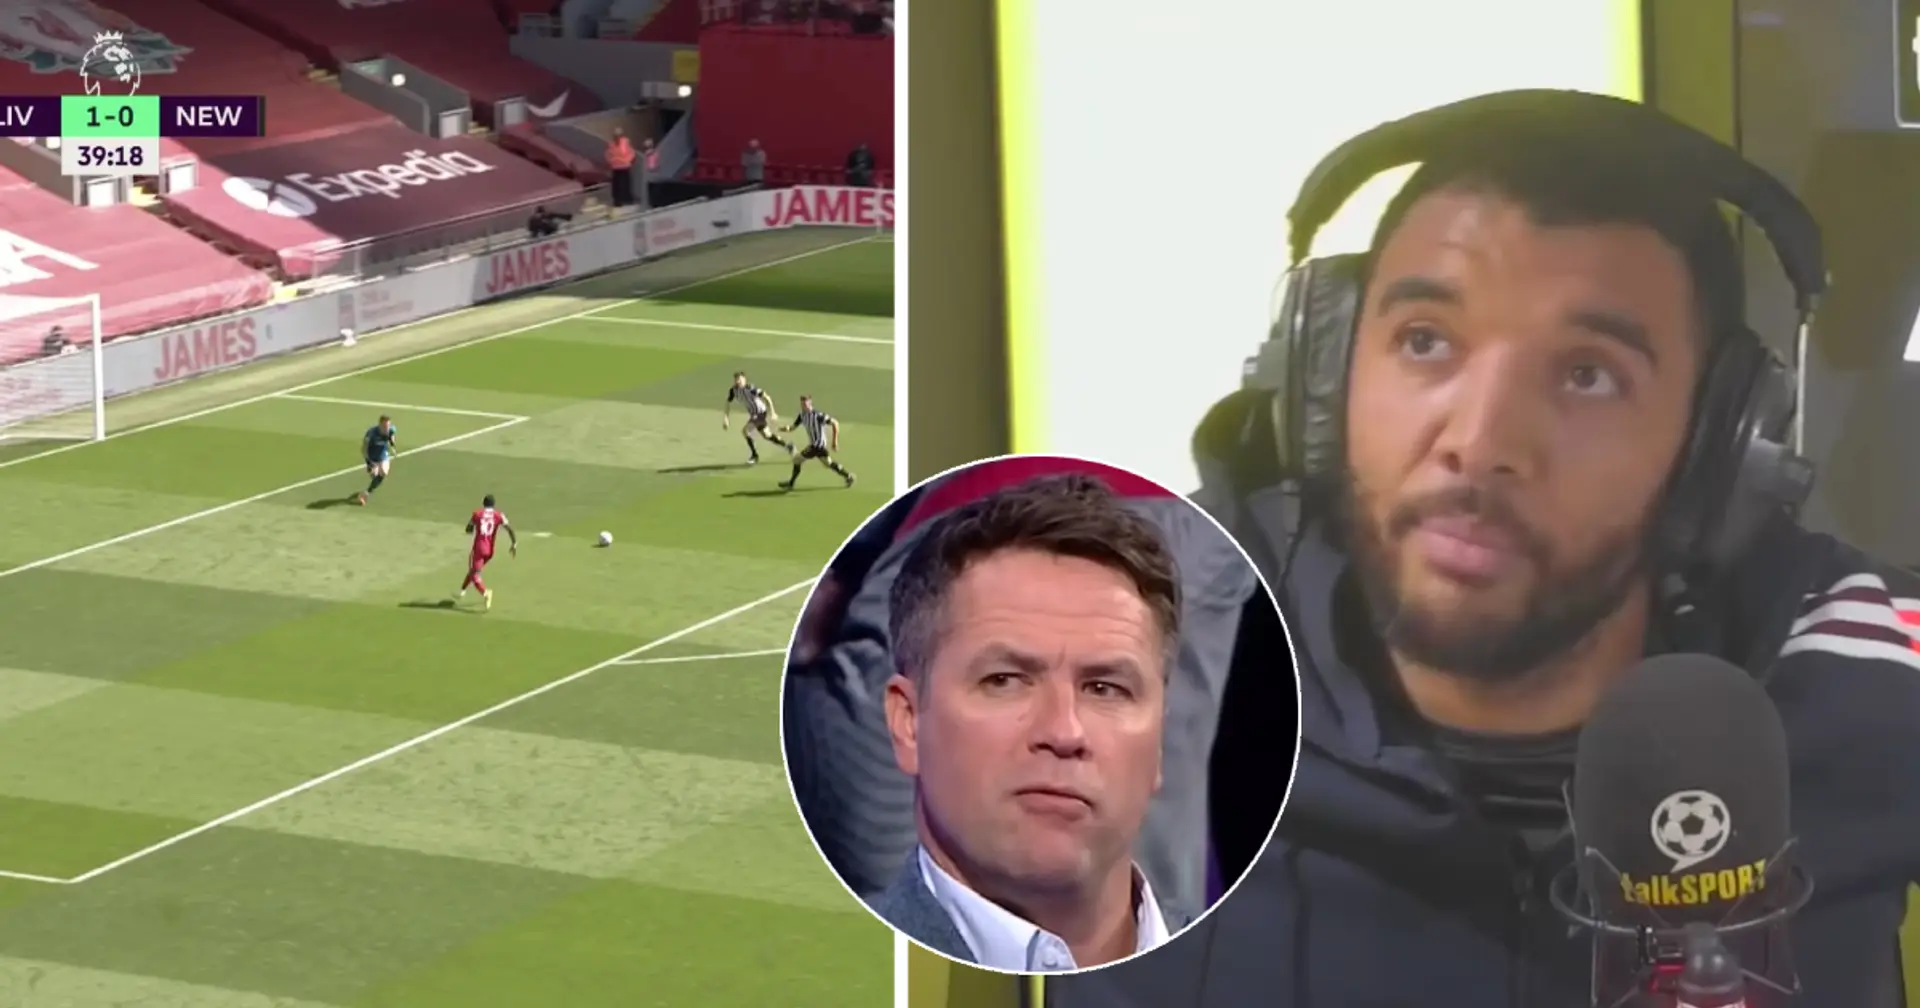 Owen and Deeney see no 'natural goalscorer' in Liverpool's front 4: Analysing their claims using 2 key stats